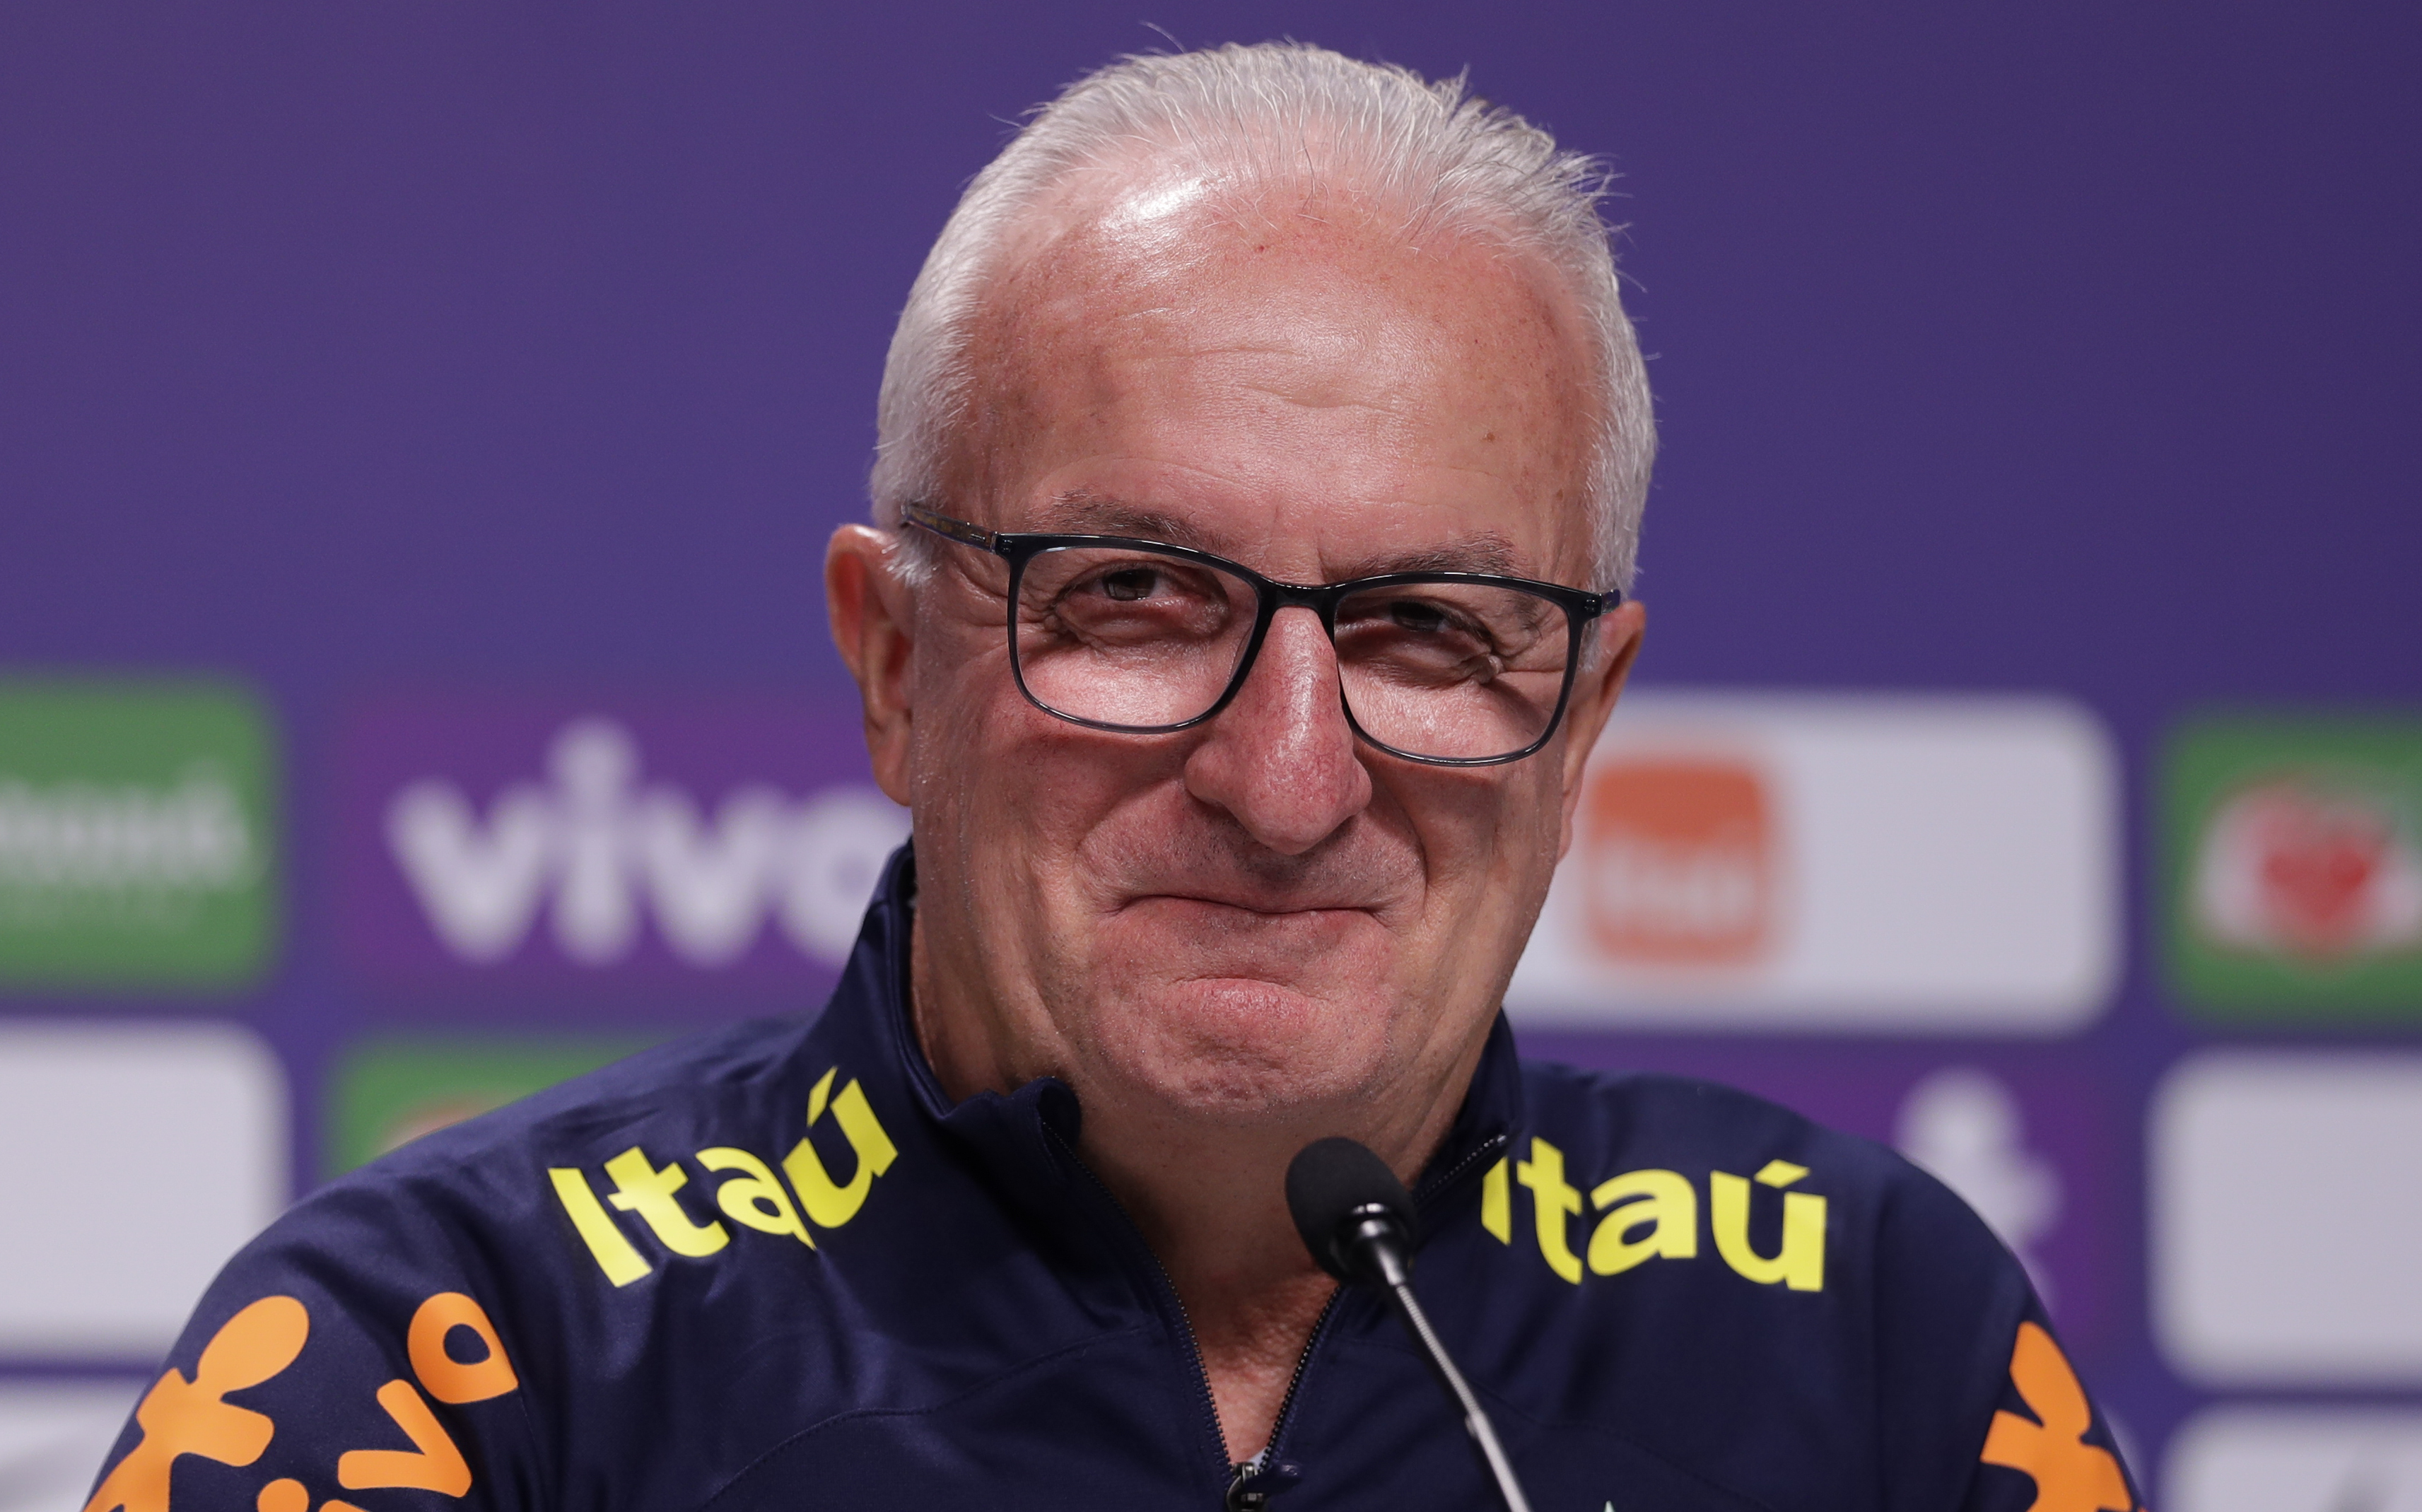 Brazil turn to Dorival Junior to get World Cup qualification back on track